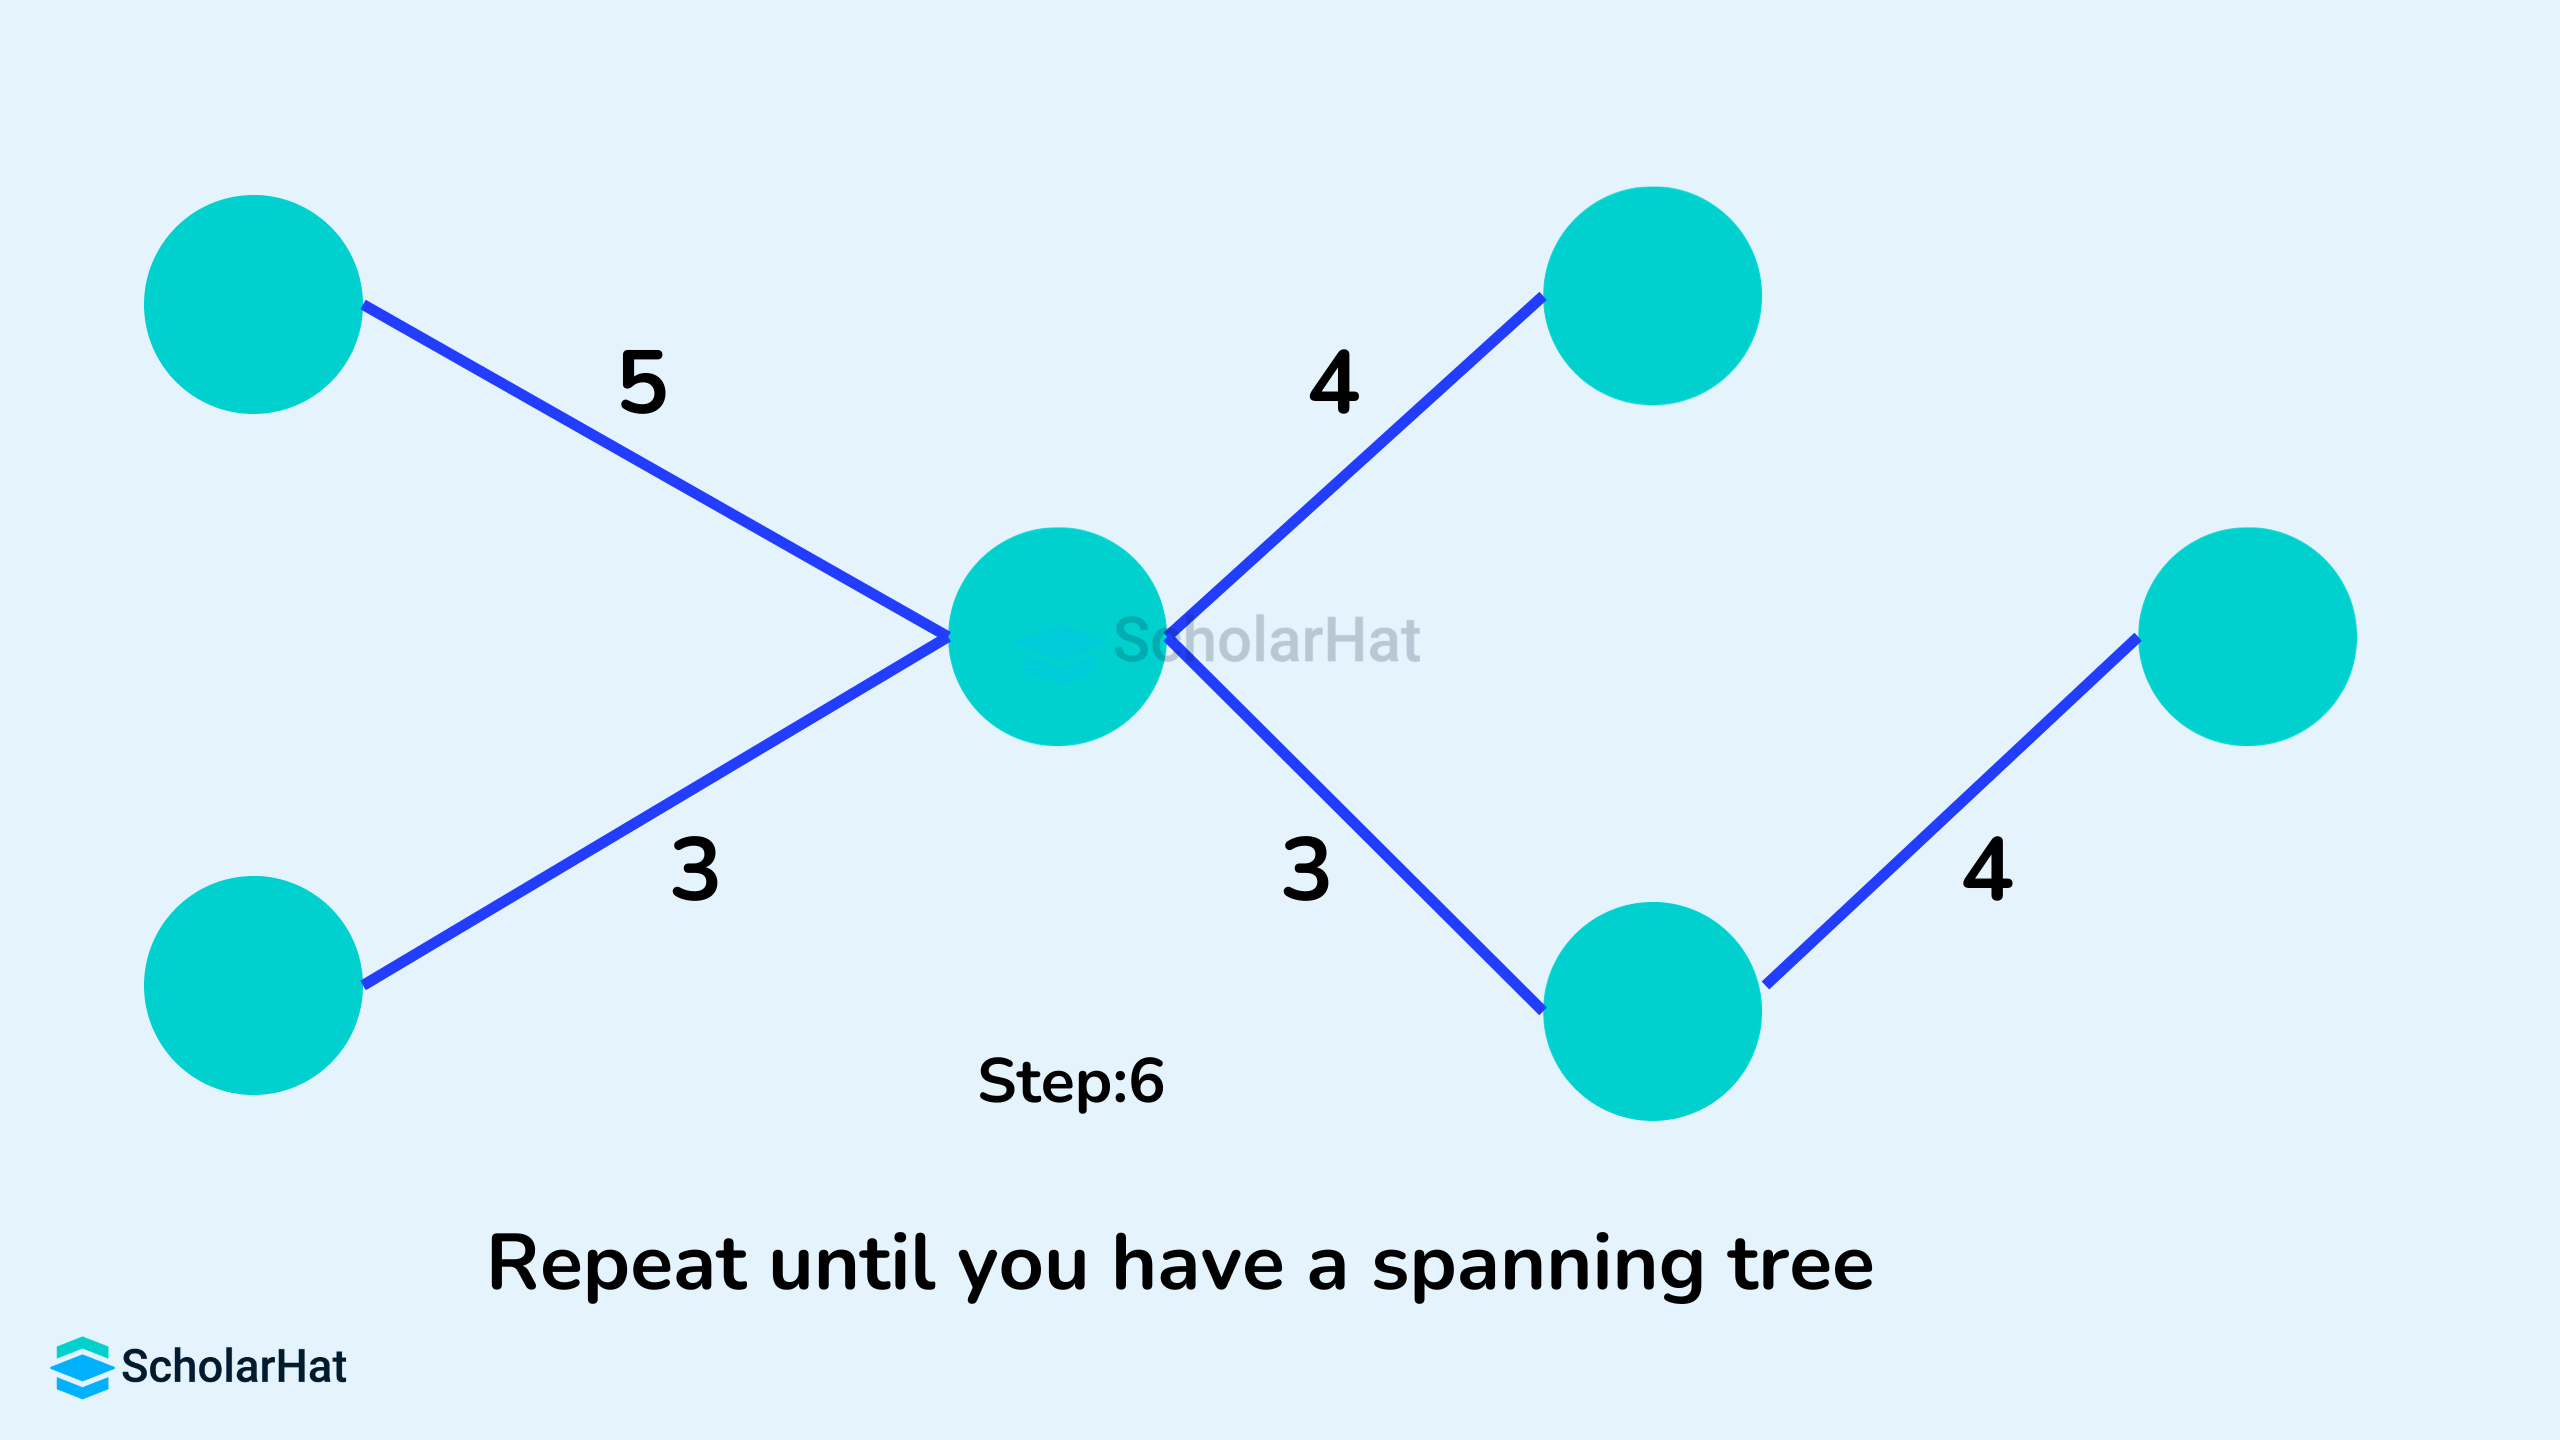 Repeat until you have a spanning tree